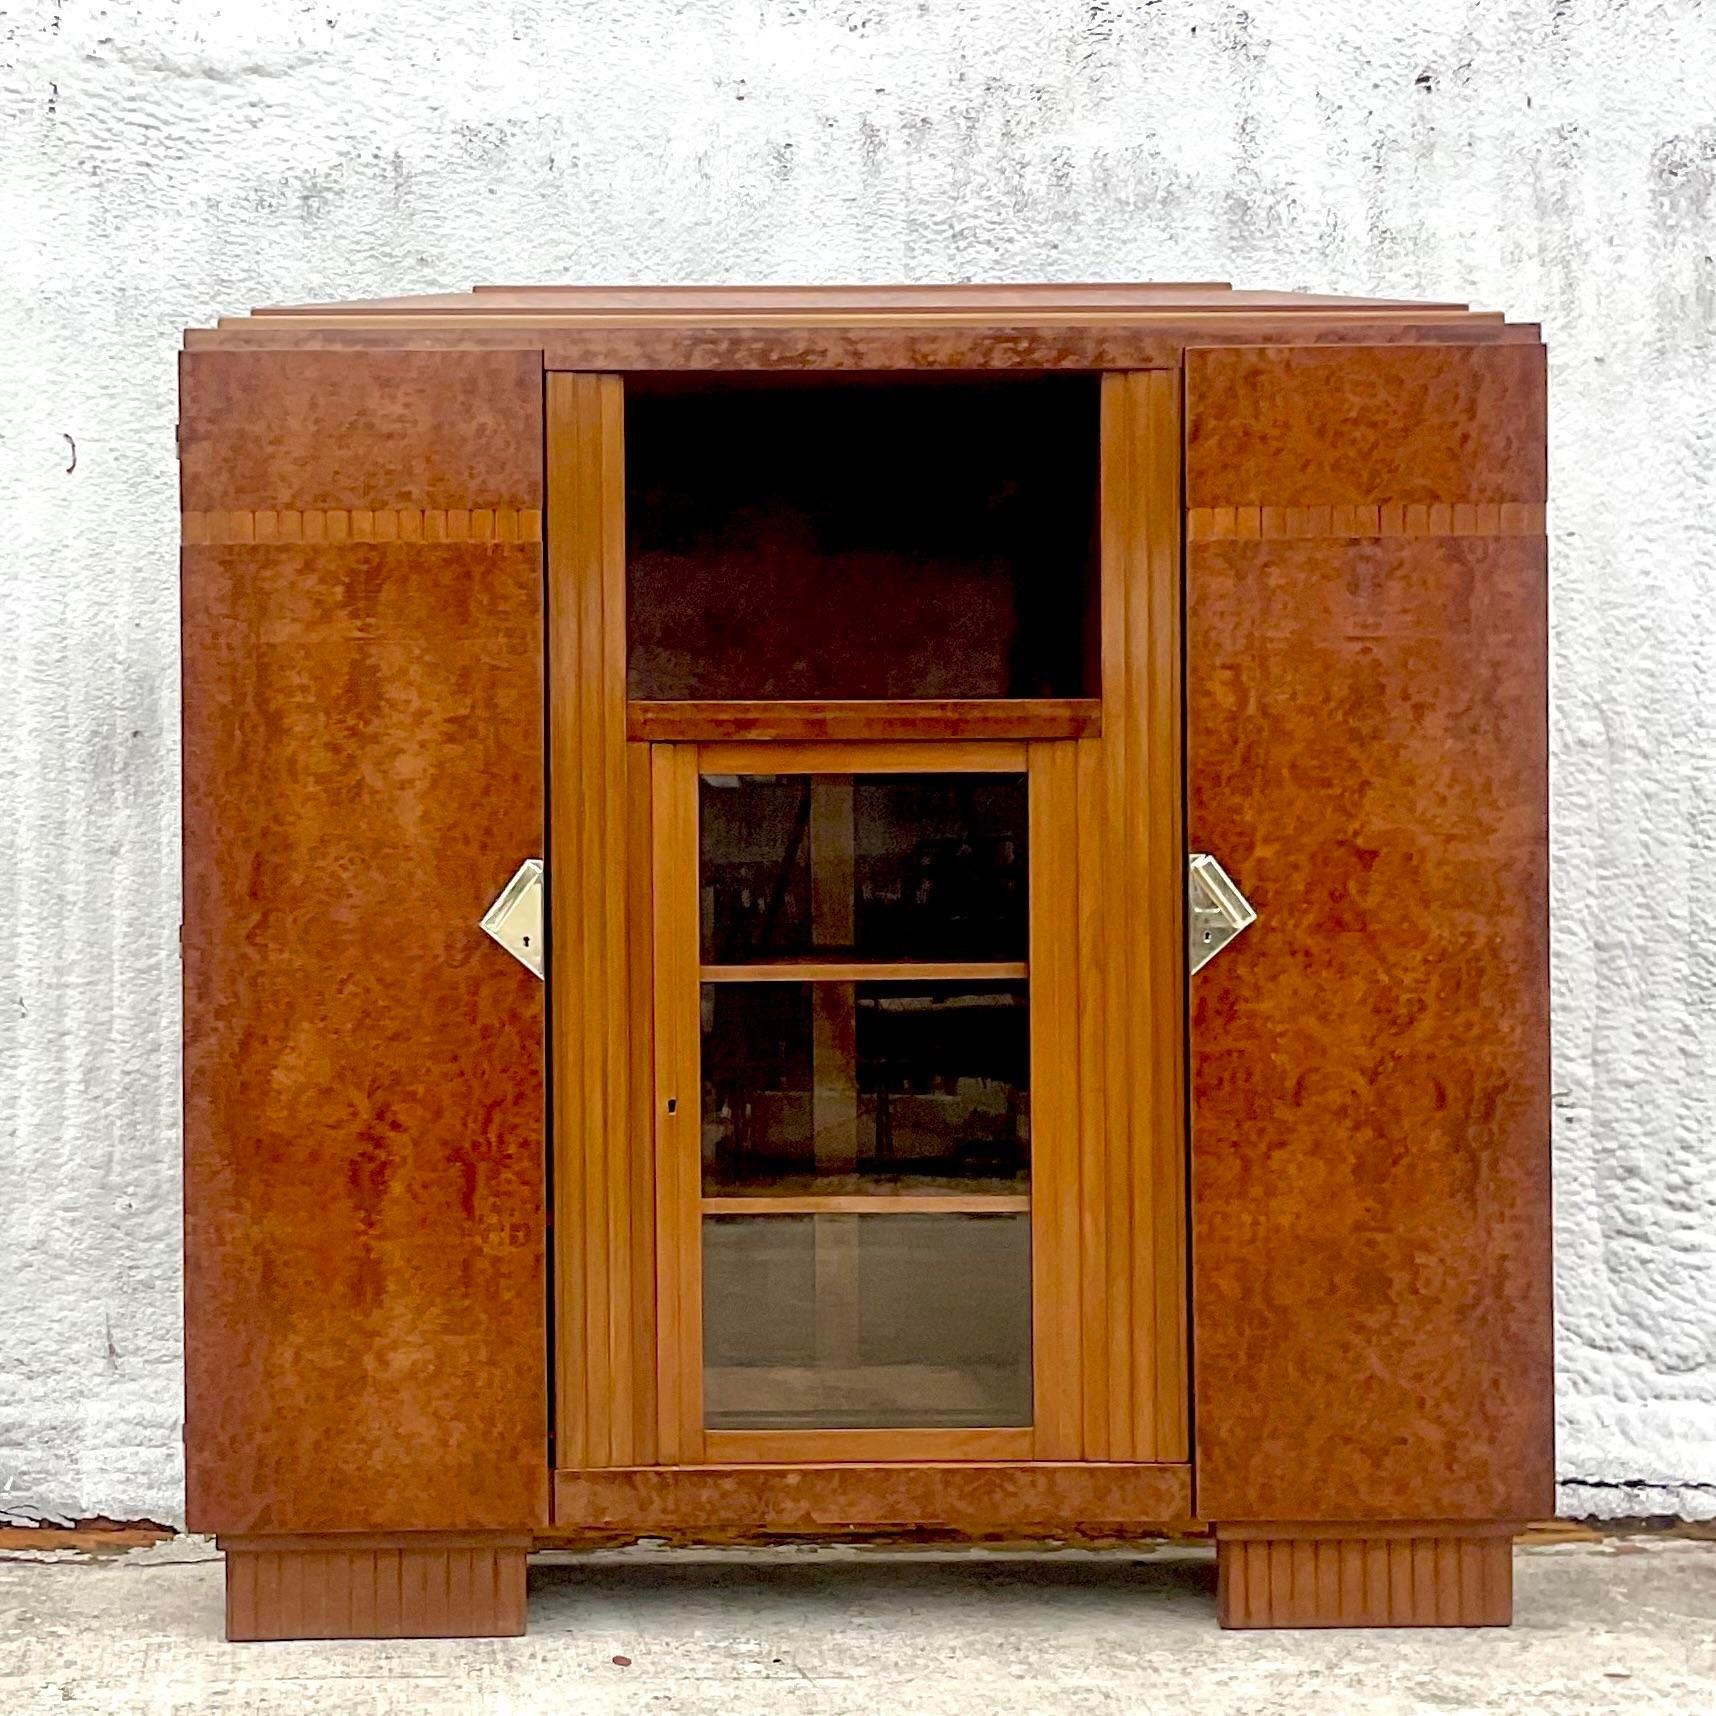 A fabulous vintage French Art Deco armoire. A beautiful Burl wood cabinet with inset glass door. Lots of great interior storage. Polished nickel hardware. Tagged Desborne Paris. Acquired from a Palm Beach estate.